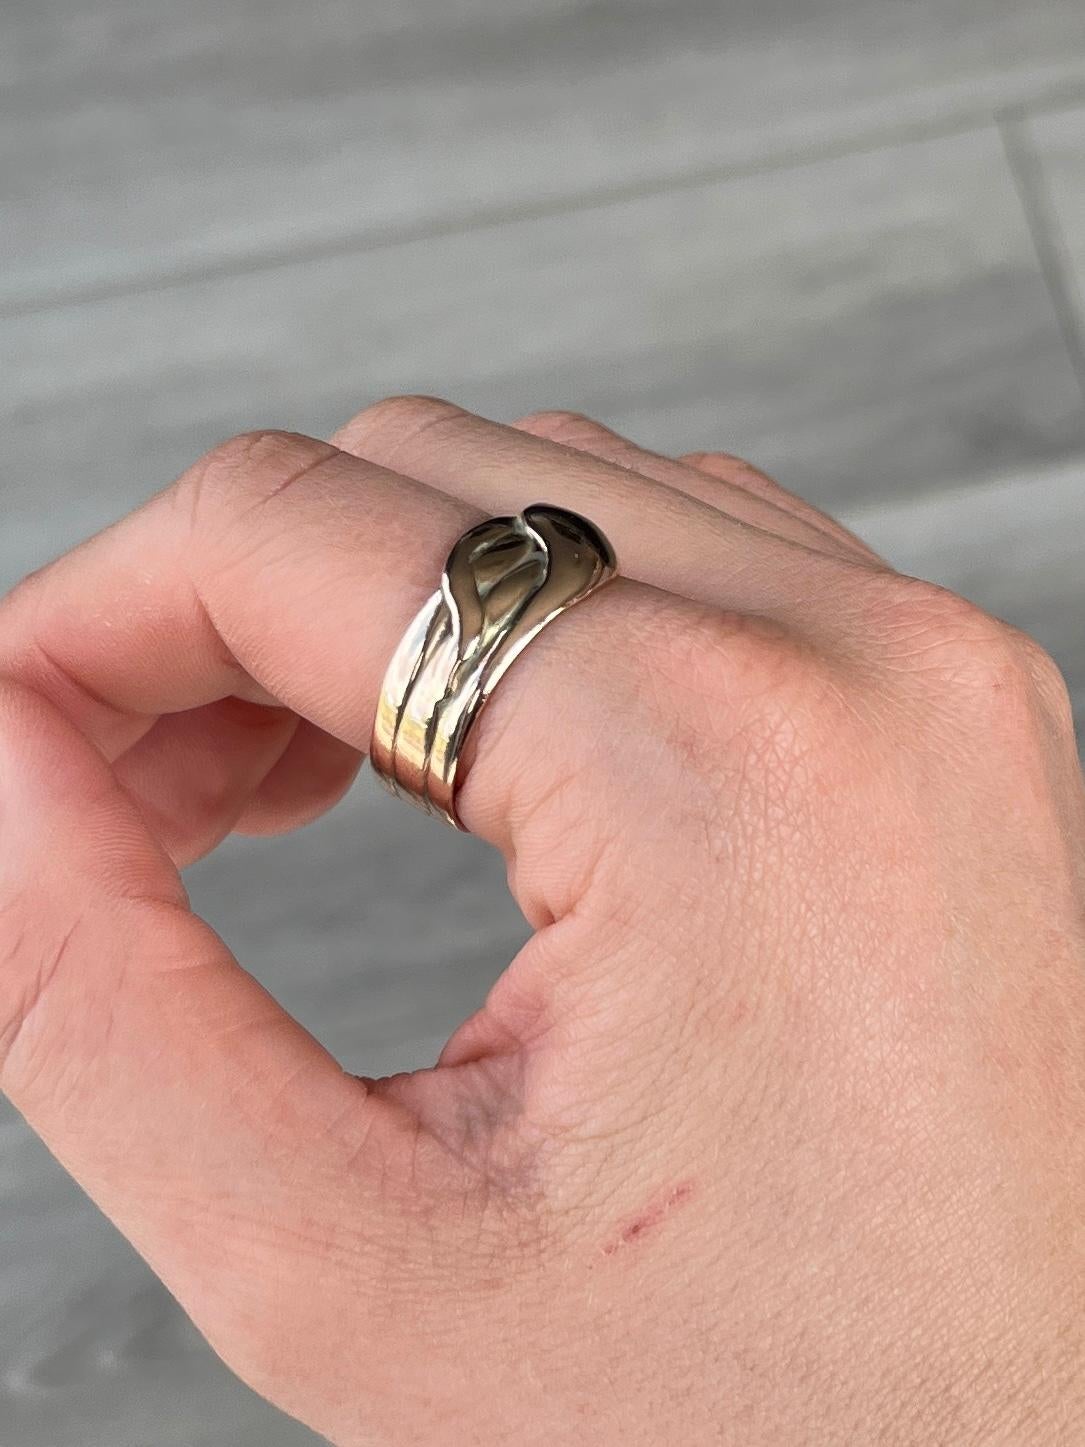 Snake rings are always a winner in my book! This snake in particular is modelled in 9ct gold and wraps around your finger beautifully. 

Ring Size: X or 11 1/2 
Band Width Widest Part: 11mm

Weight: 5.6g